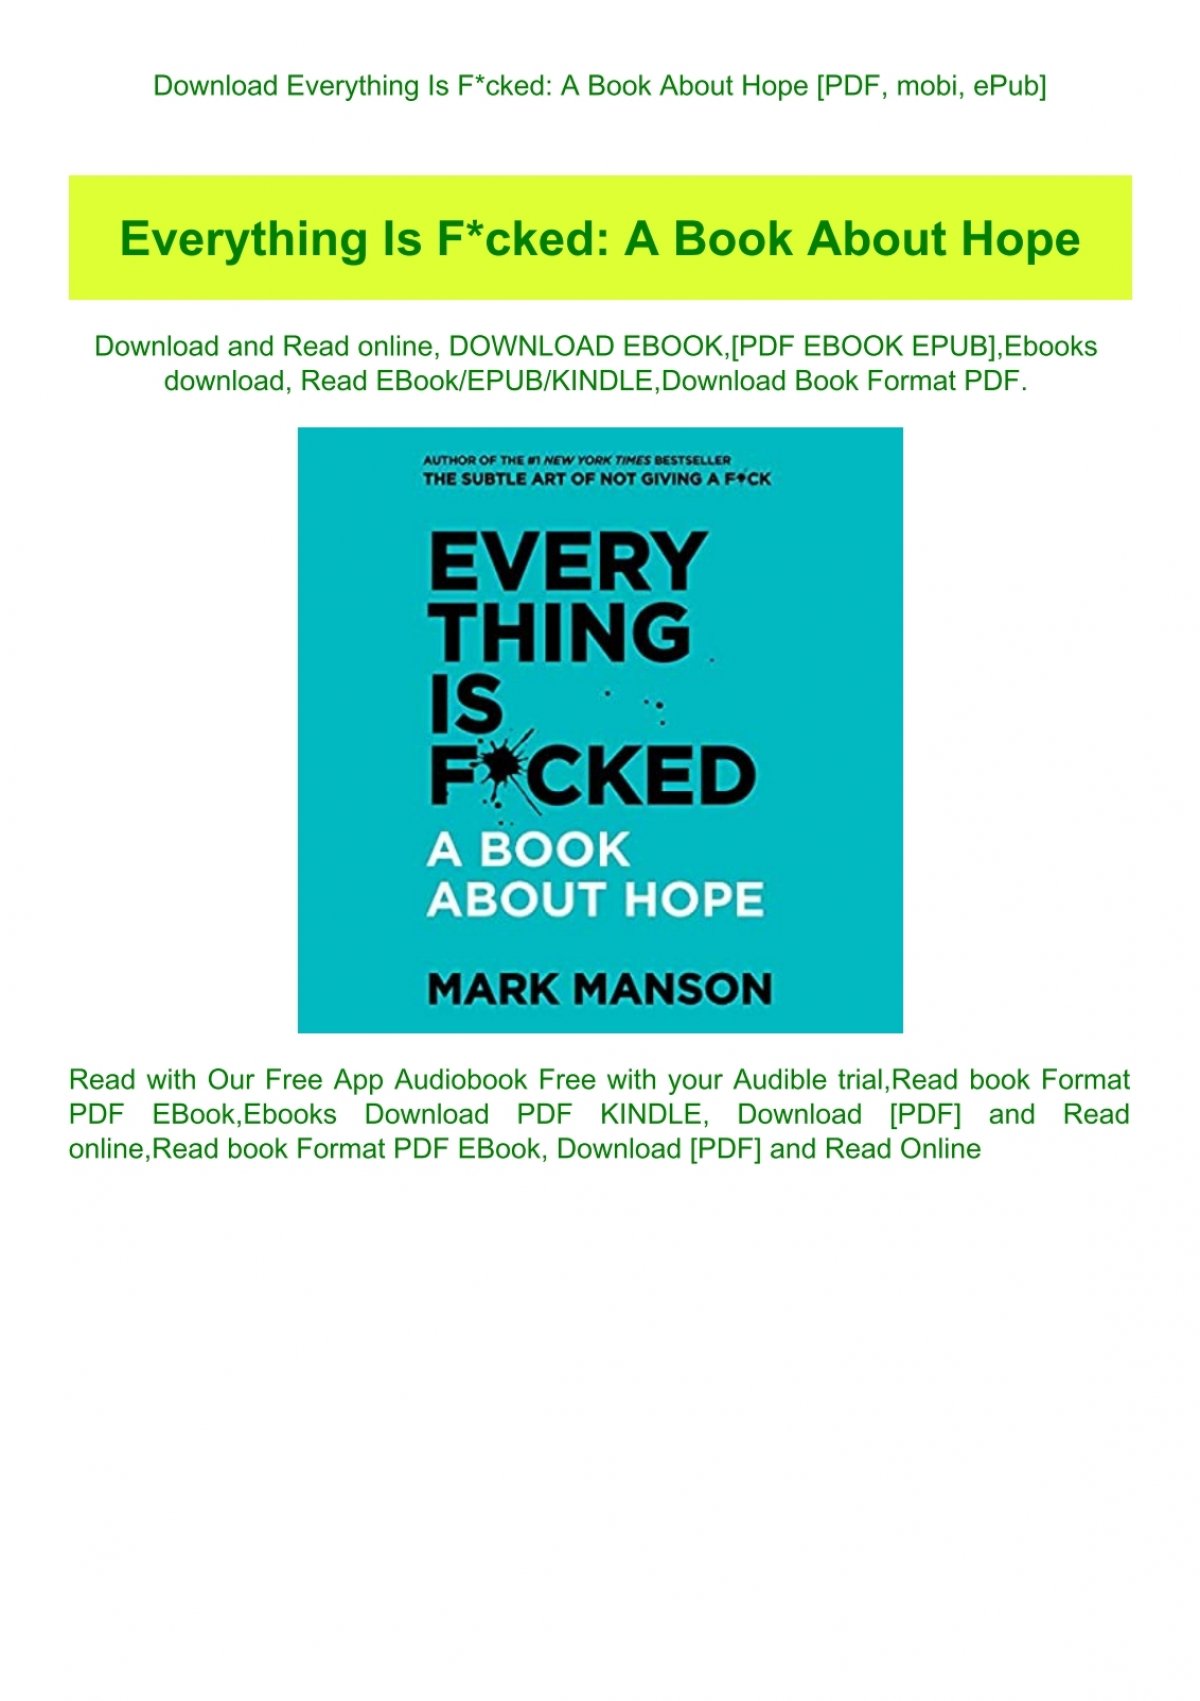 Download Everything Is Fcked A Book About Hope Pdf Mobi Epub